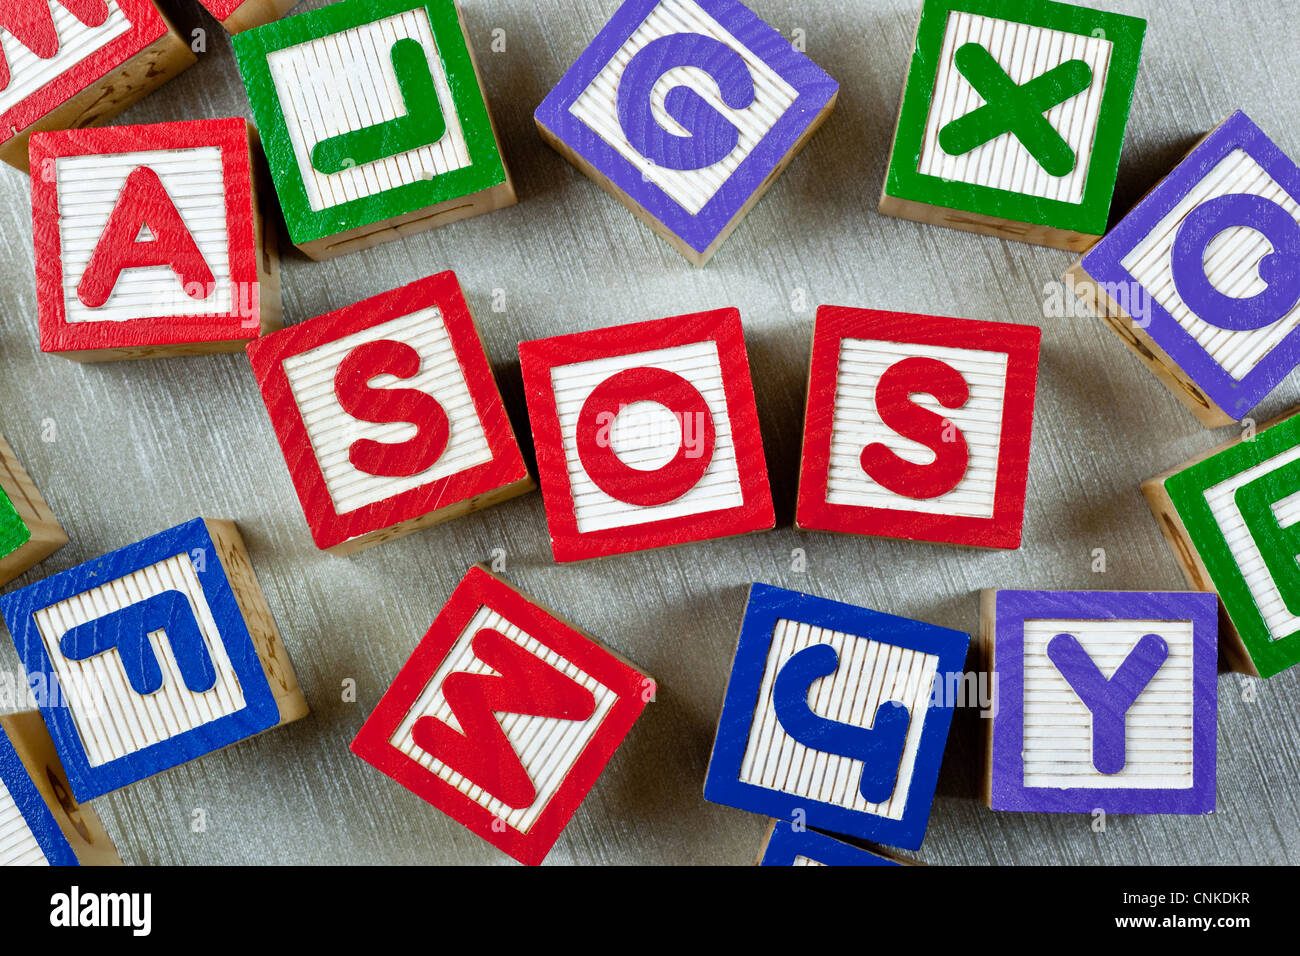 Wooden blocks forming the letters SOS in the center Stock Photo